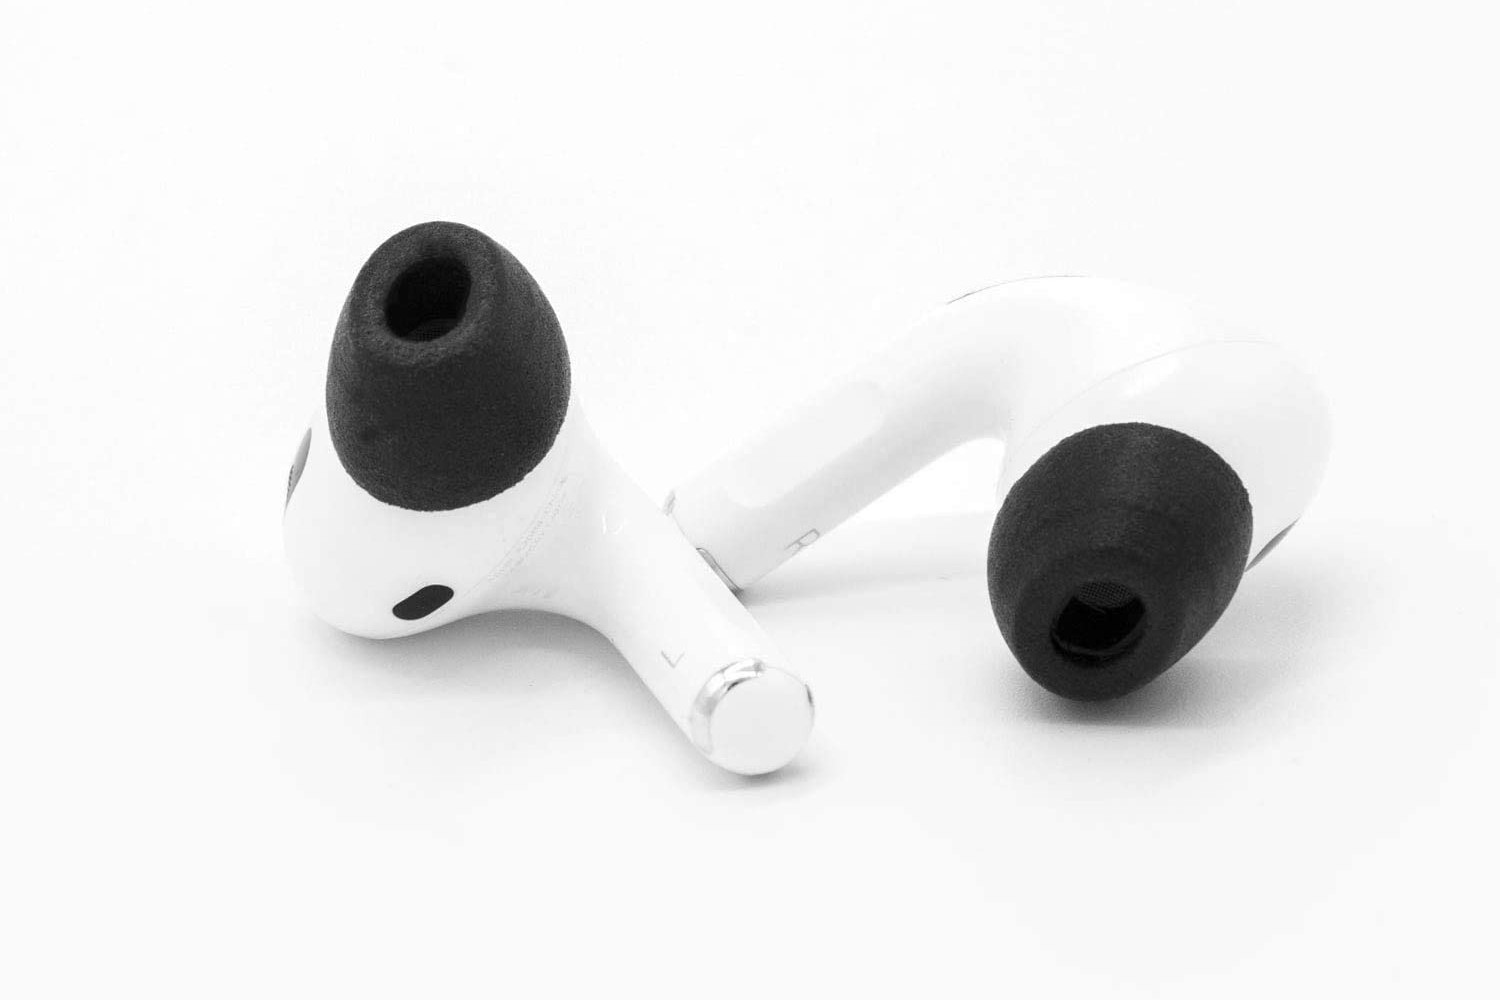 The Comply Foam Earbud Tips for AirPods Pro.